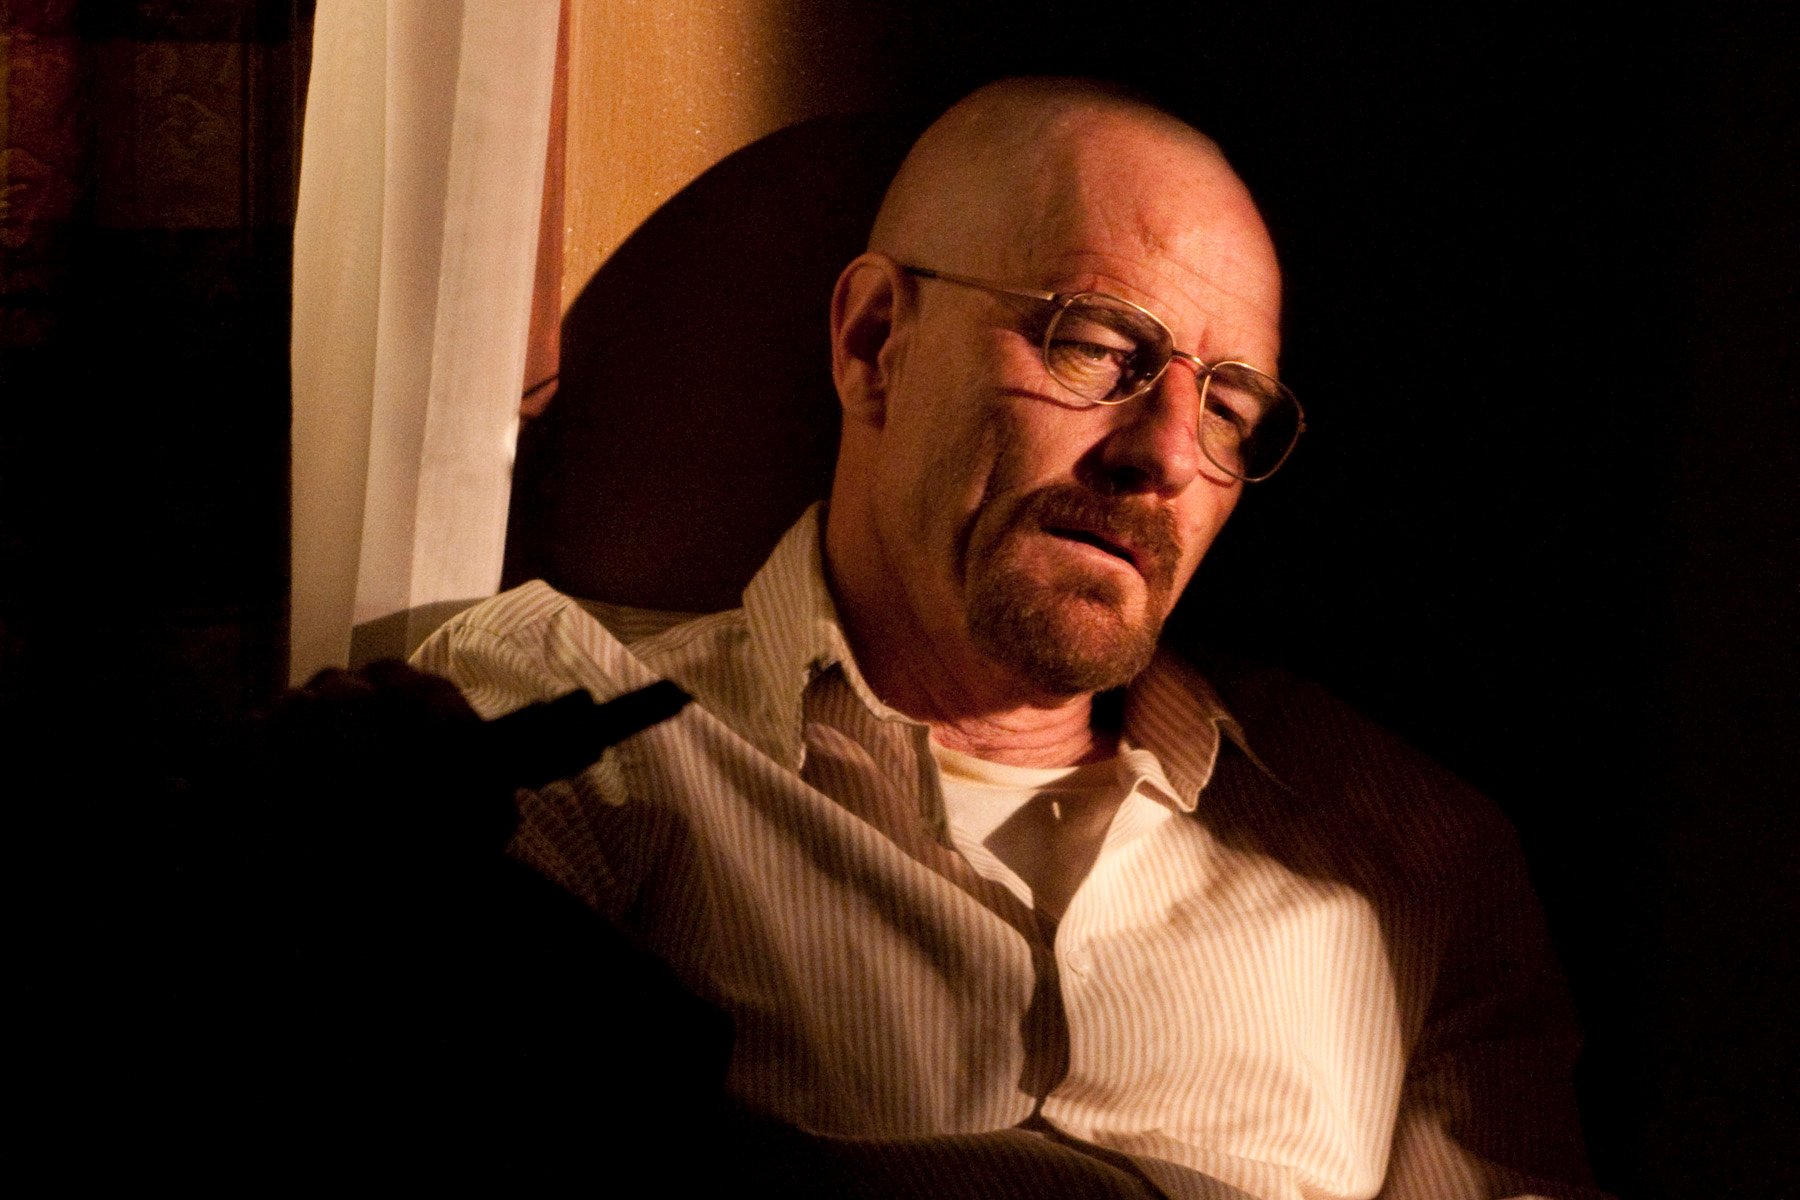 A Horrific ‘Breaking Bad’ Scene Inspired the Shocking Twist in ‘Knives Out’